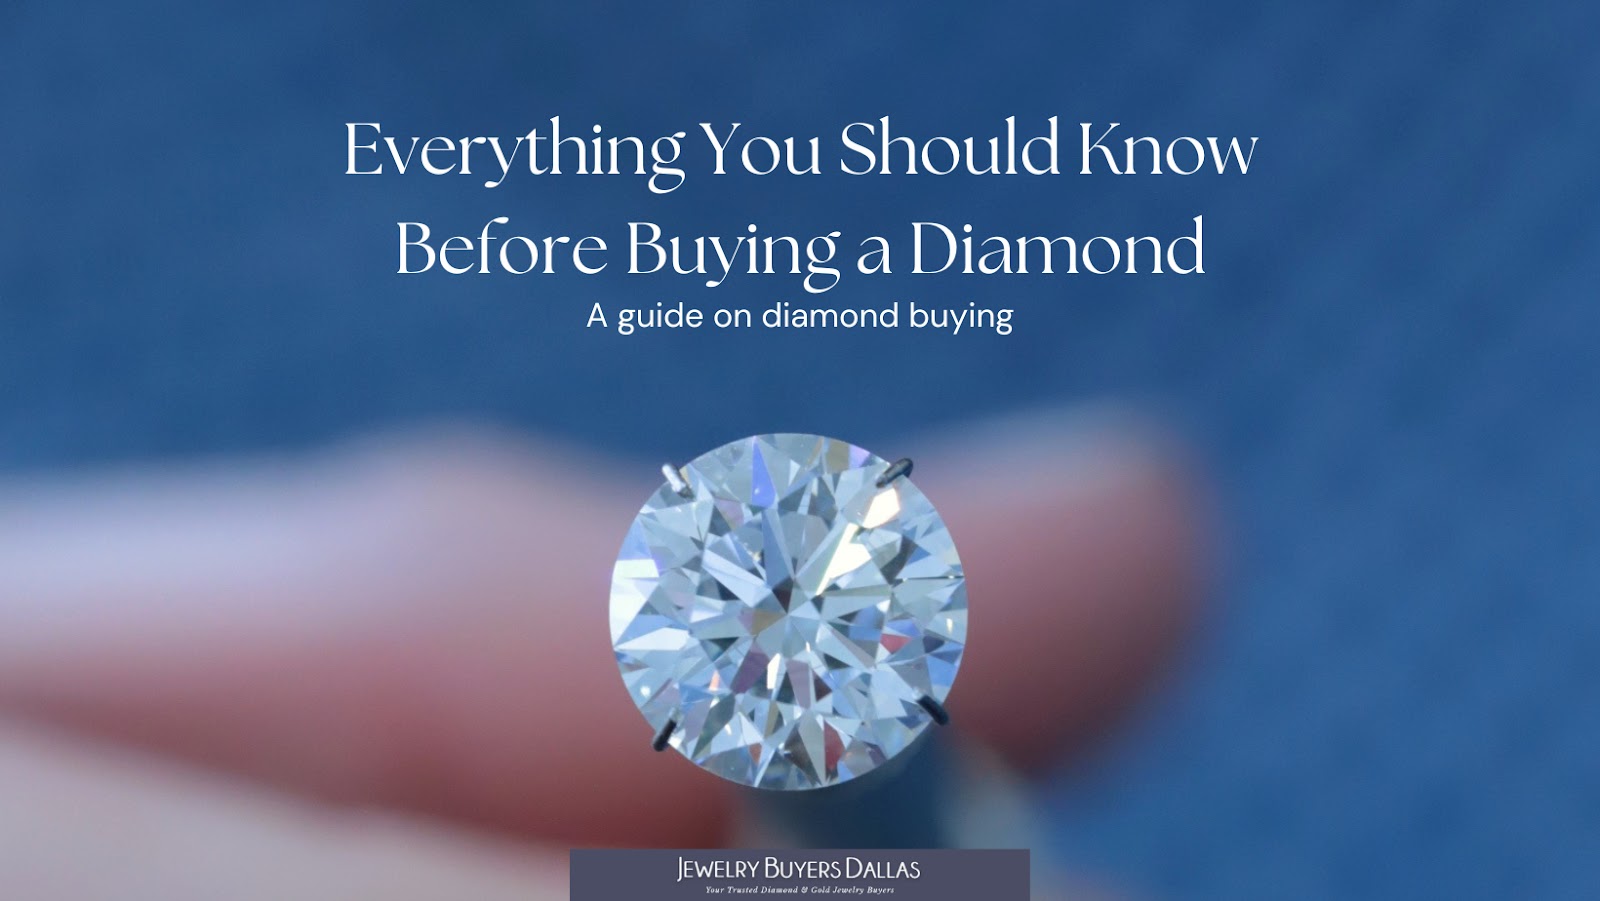 Everything You Should Know Before Buying a Diamond, Jewelry Buyers Dallas, Dallas, Texas. 